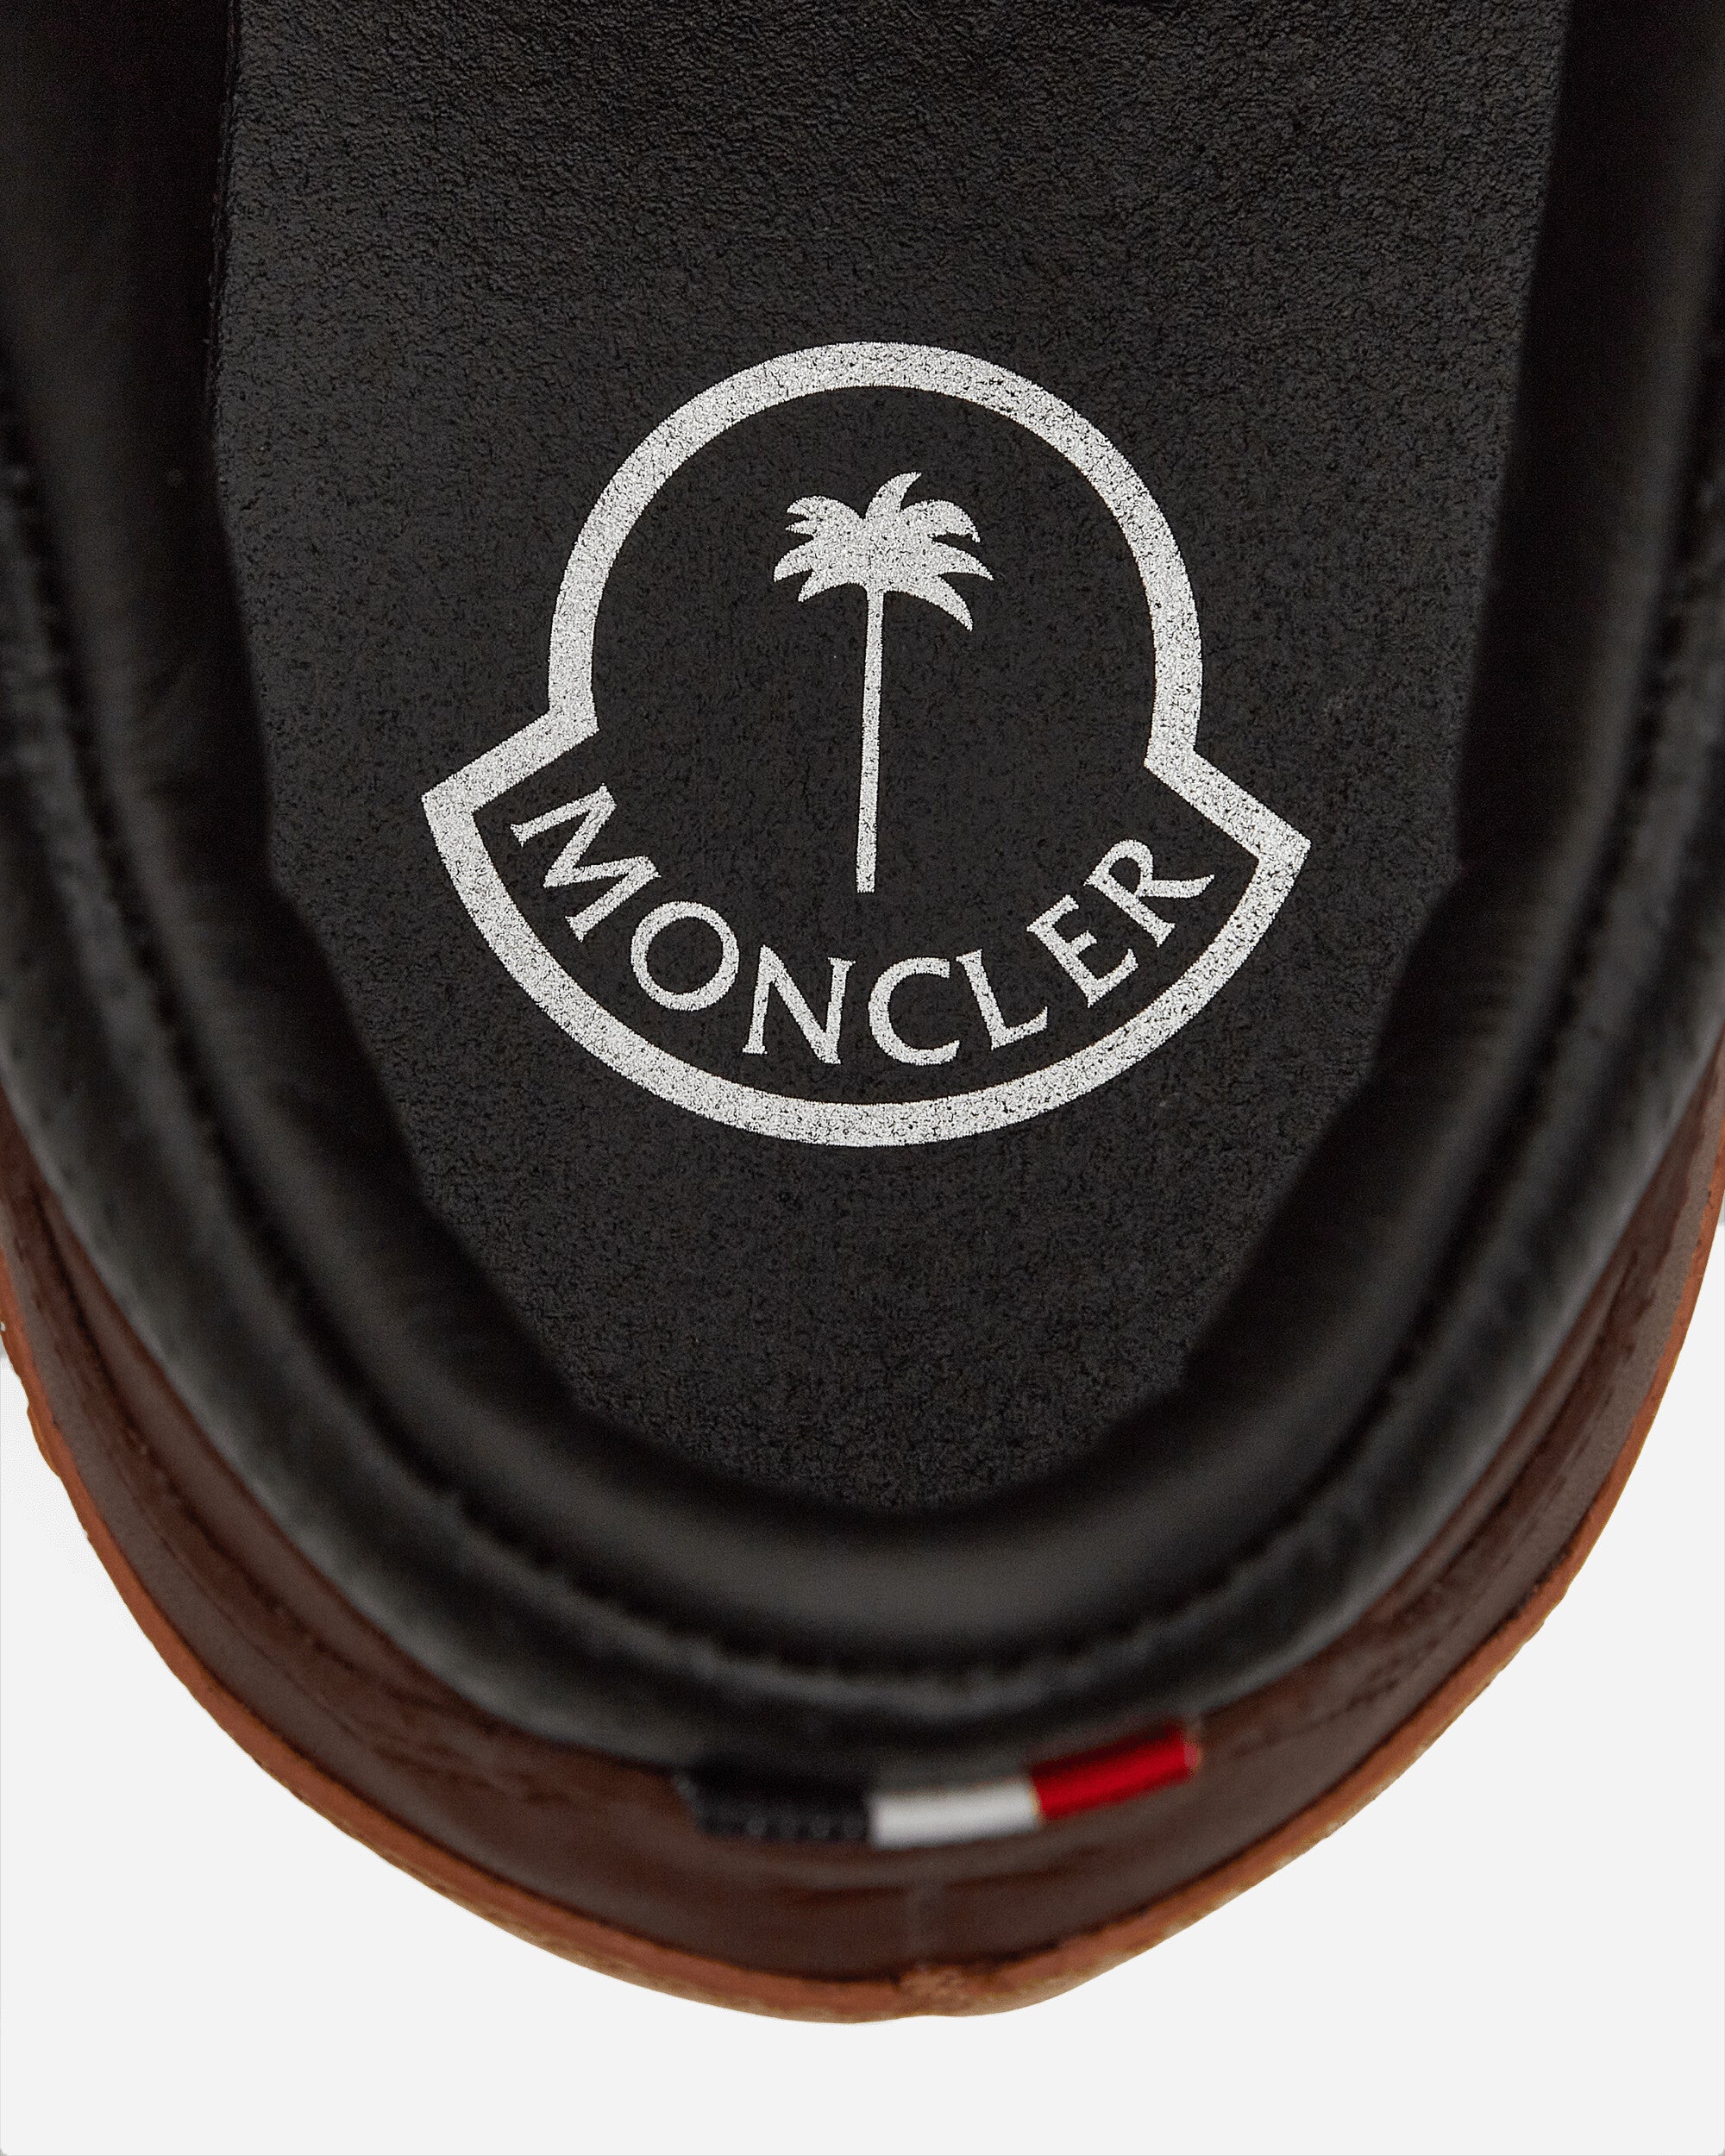 Moncler Genius Peka 305 Derby Shoes X Palm Angels Brown Classic Shoes Laced Up 4I00020M3733 25B